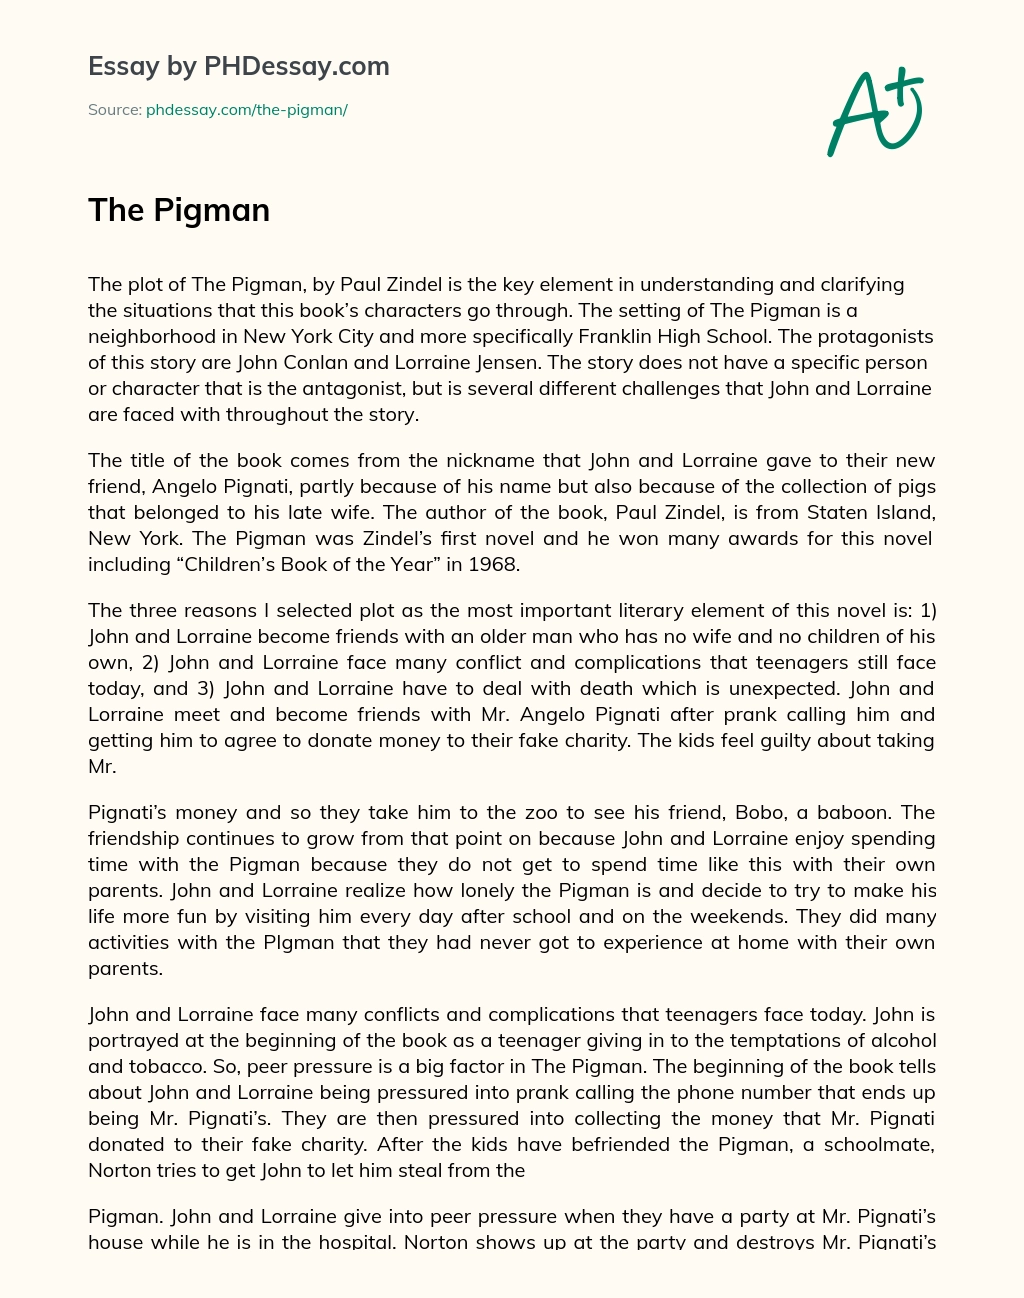 Analysis of The Pigman by Paul Zindel: Plot is Key to Understanding Characters and Situations essay